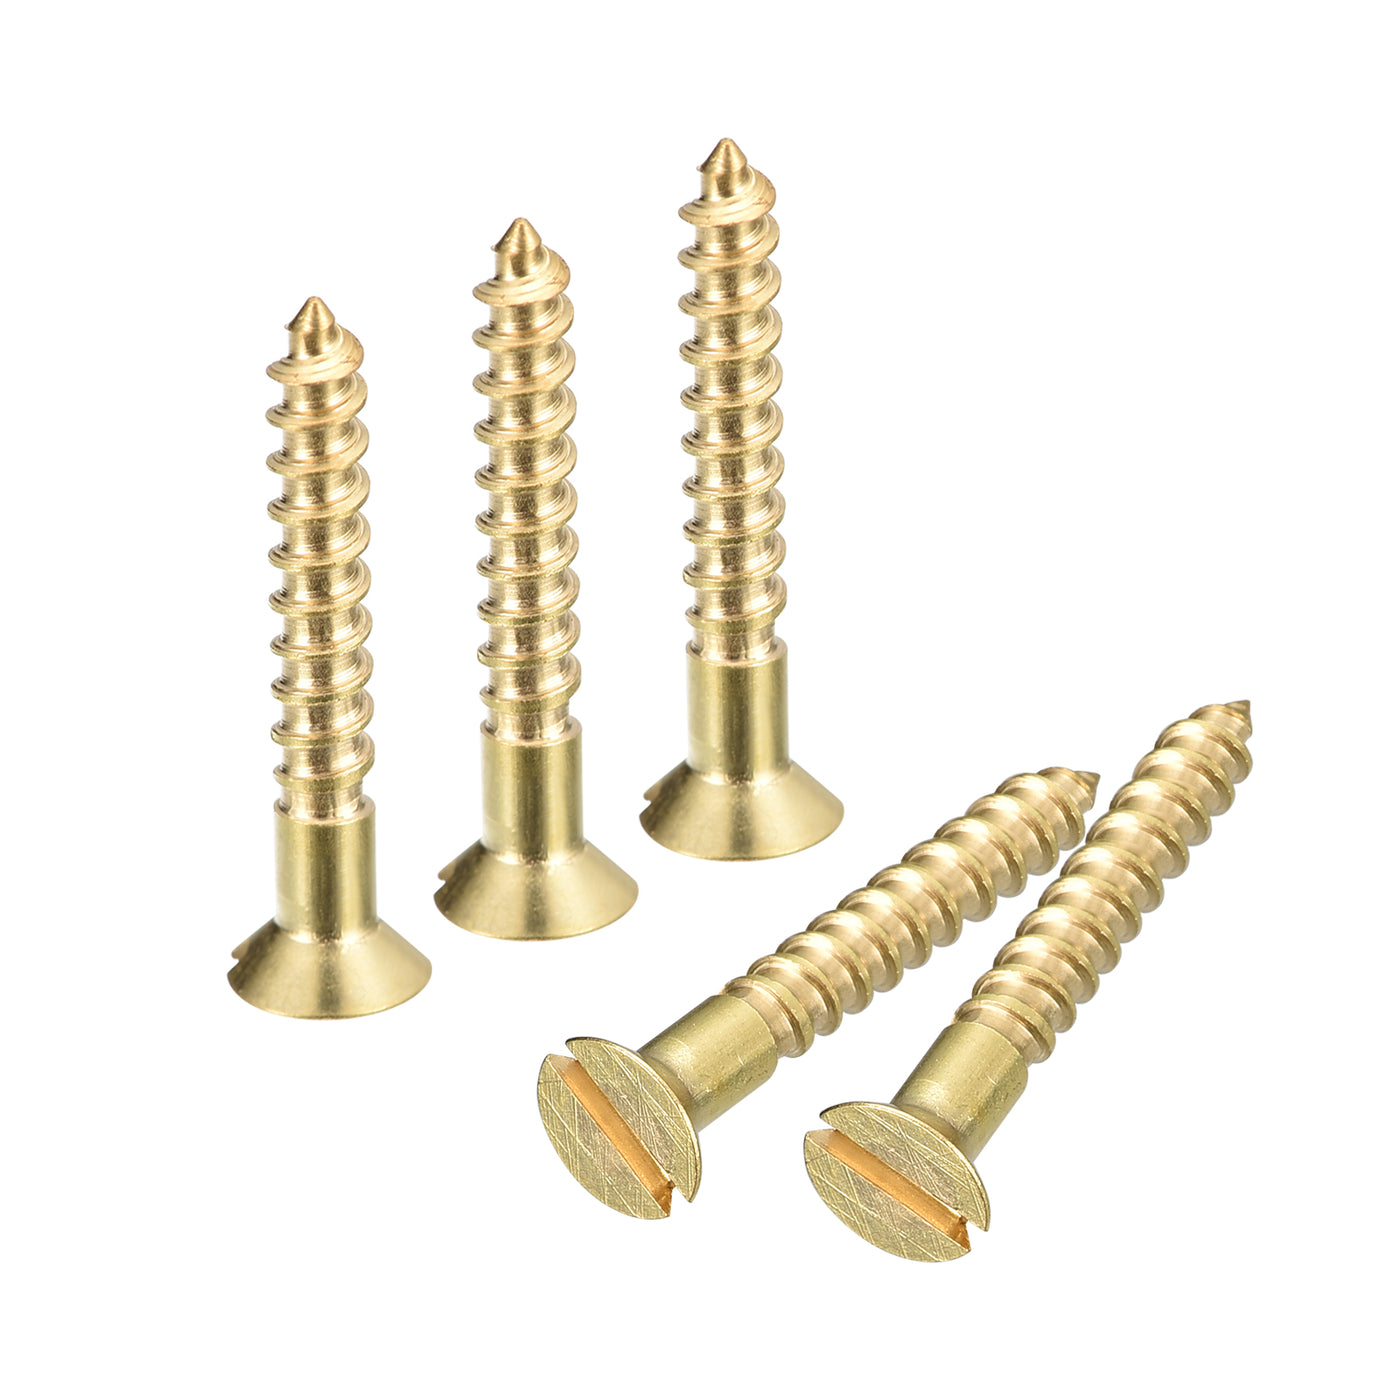 uxcell Uxcell 100Pcs M3 x 20mm Brass Slotted Drive Flat Head Wood Screws Self Tapping Screw